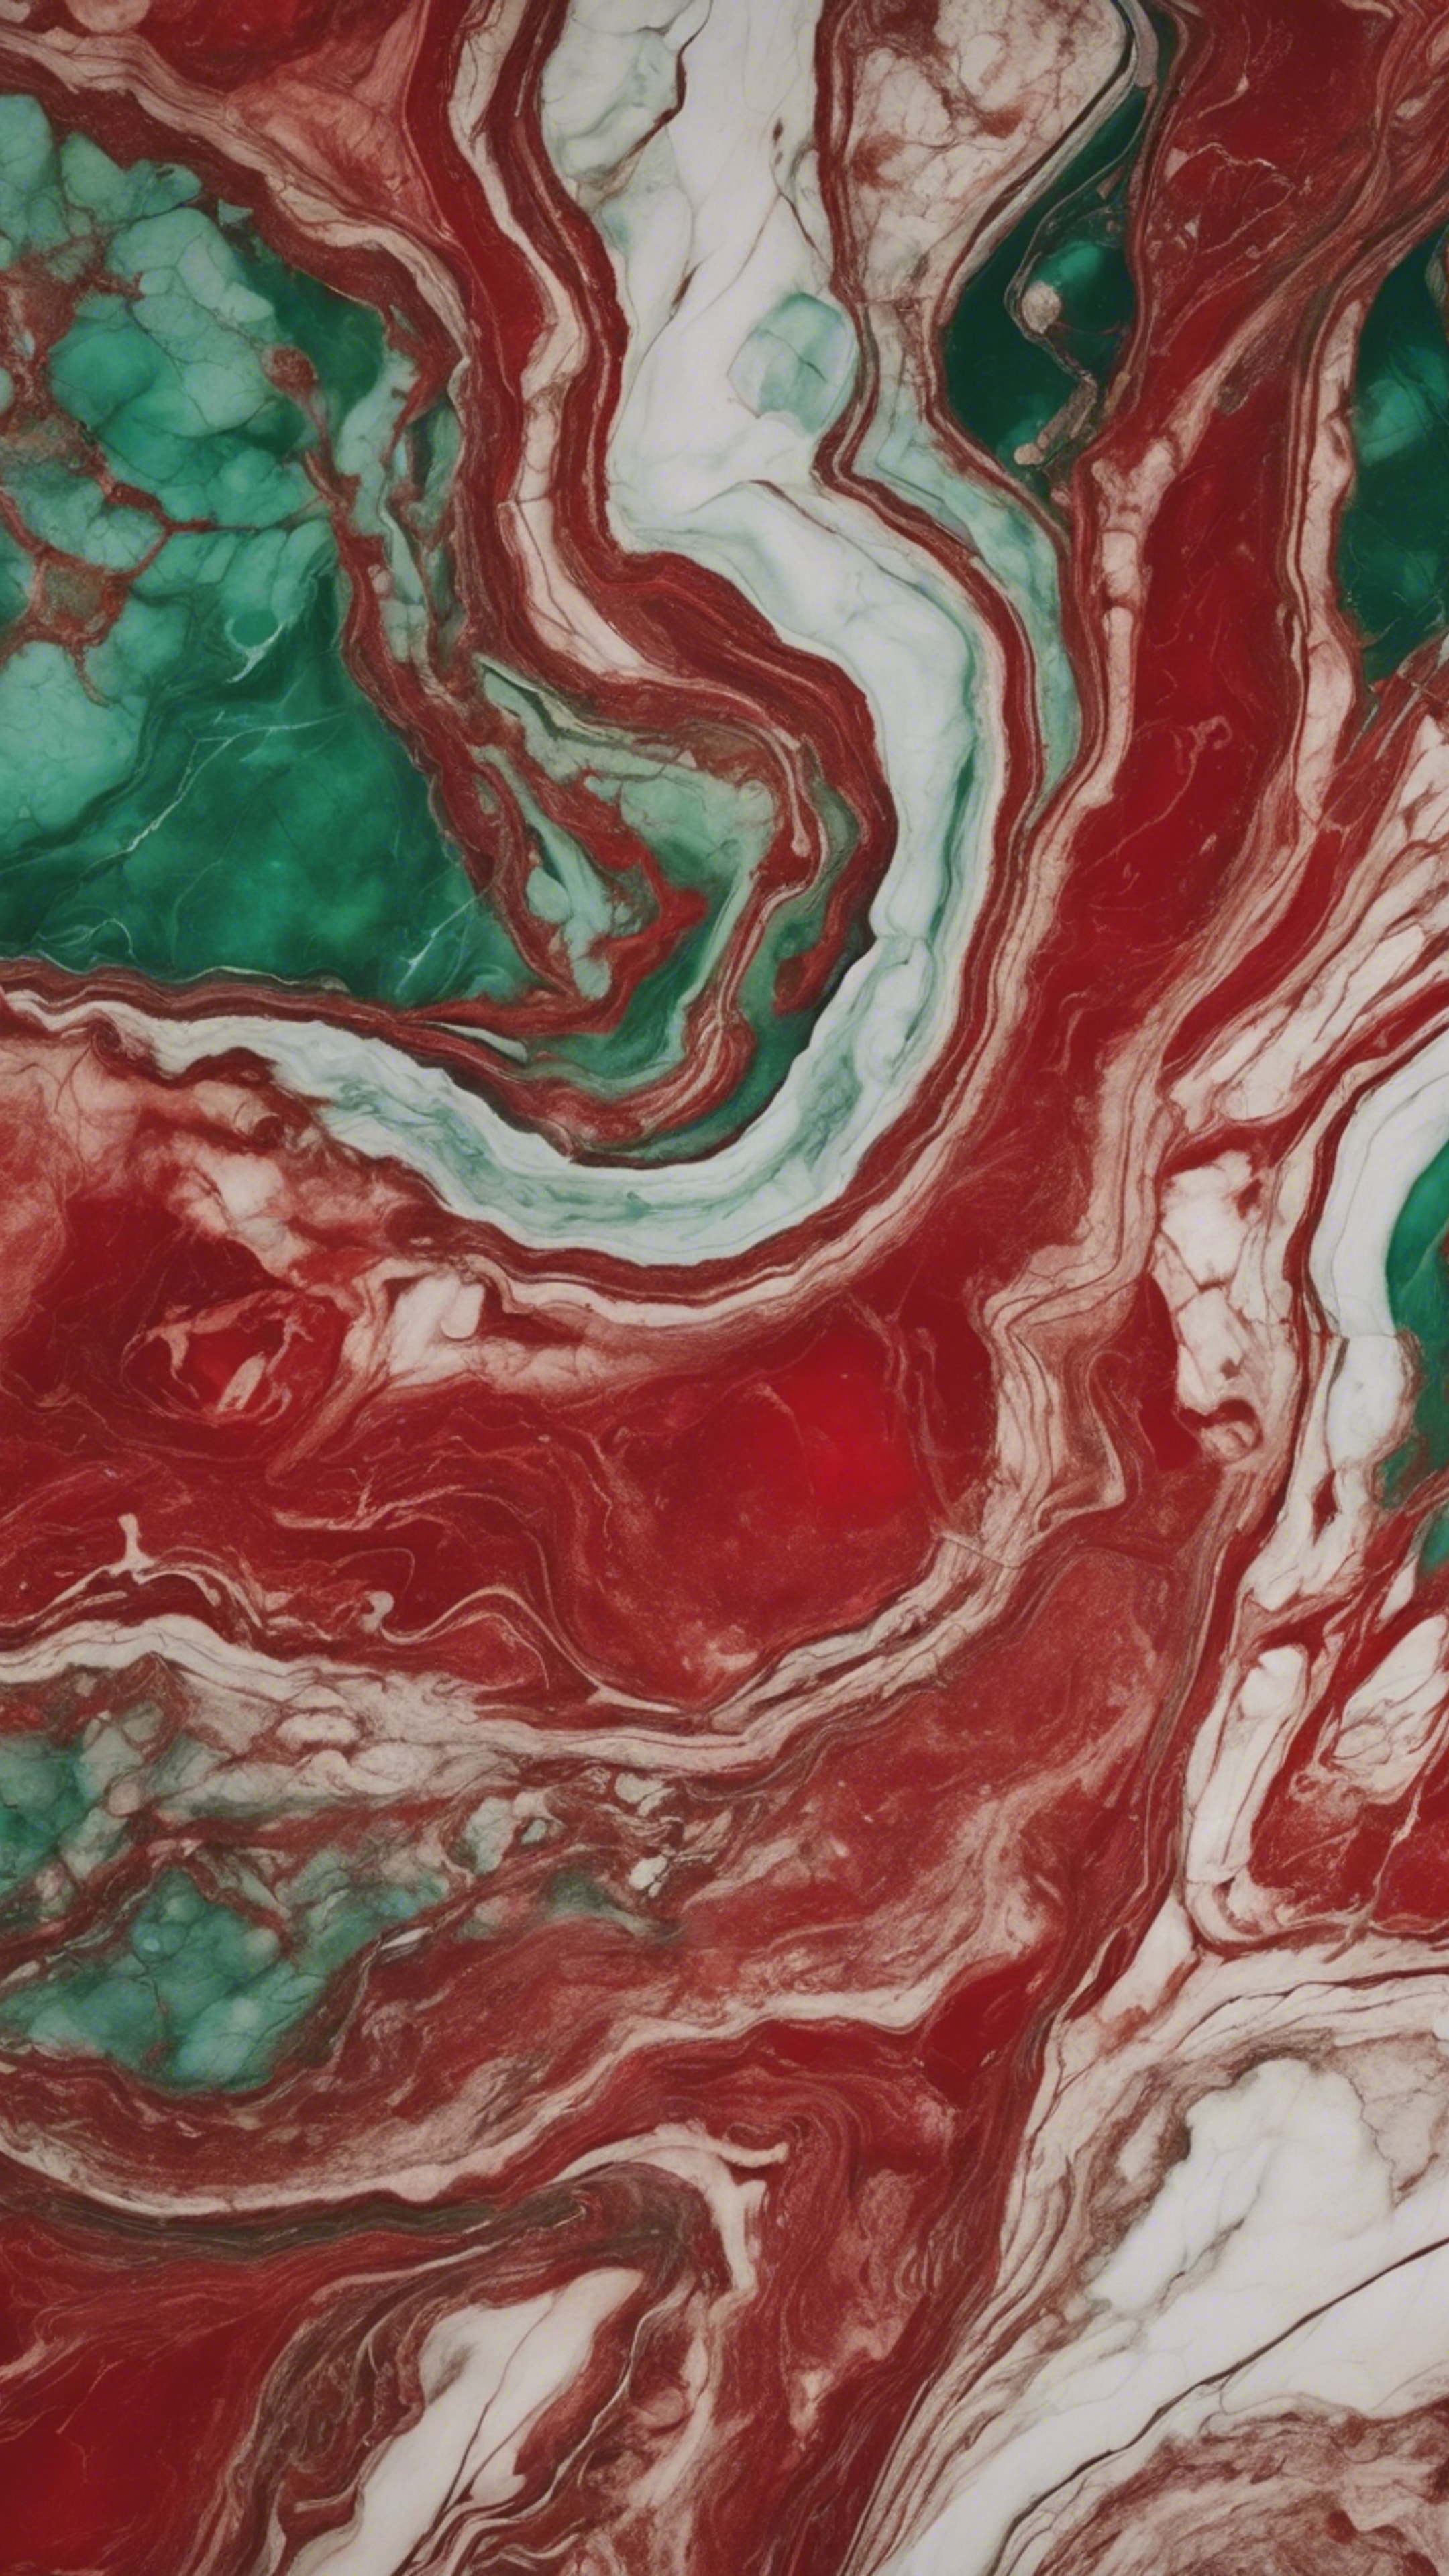 Elegant red and green marble pattern with veins running across.壁紙[edb4d3fbd47c4b239d5a]